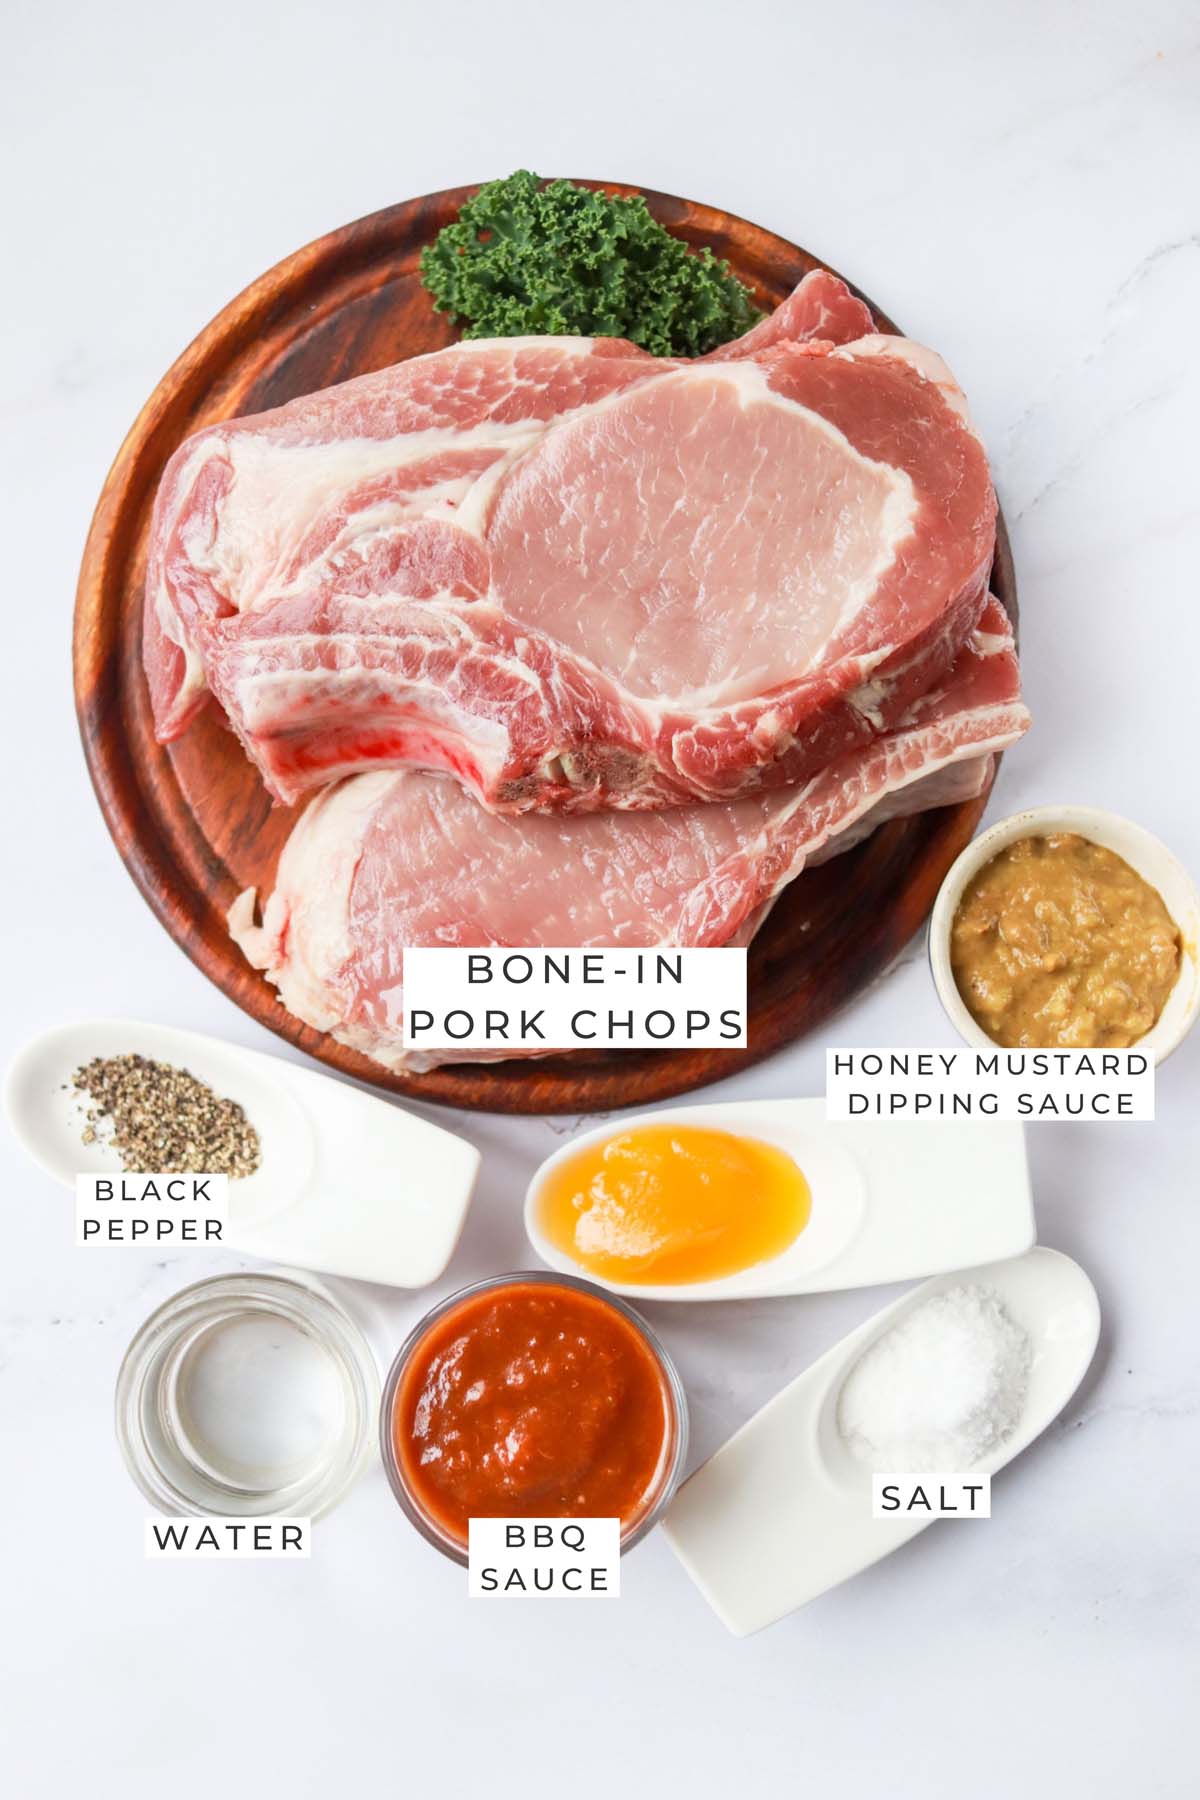 Labeled ingredients for the pork chops.